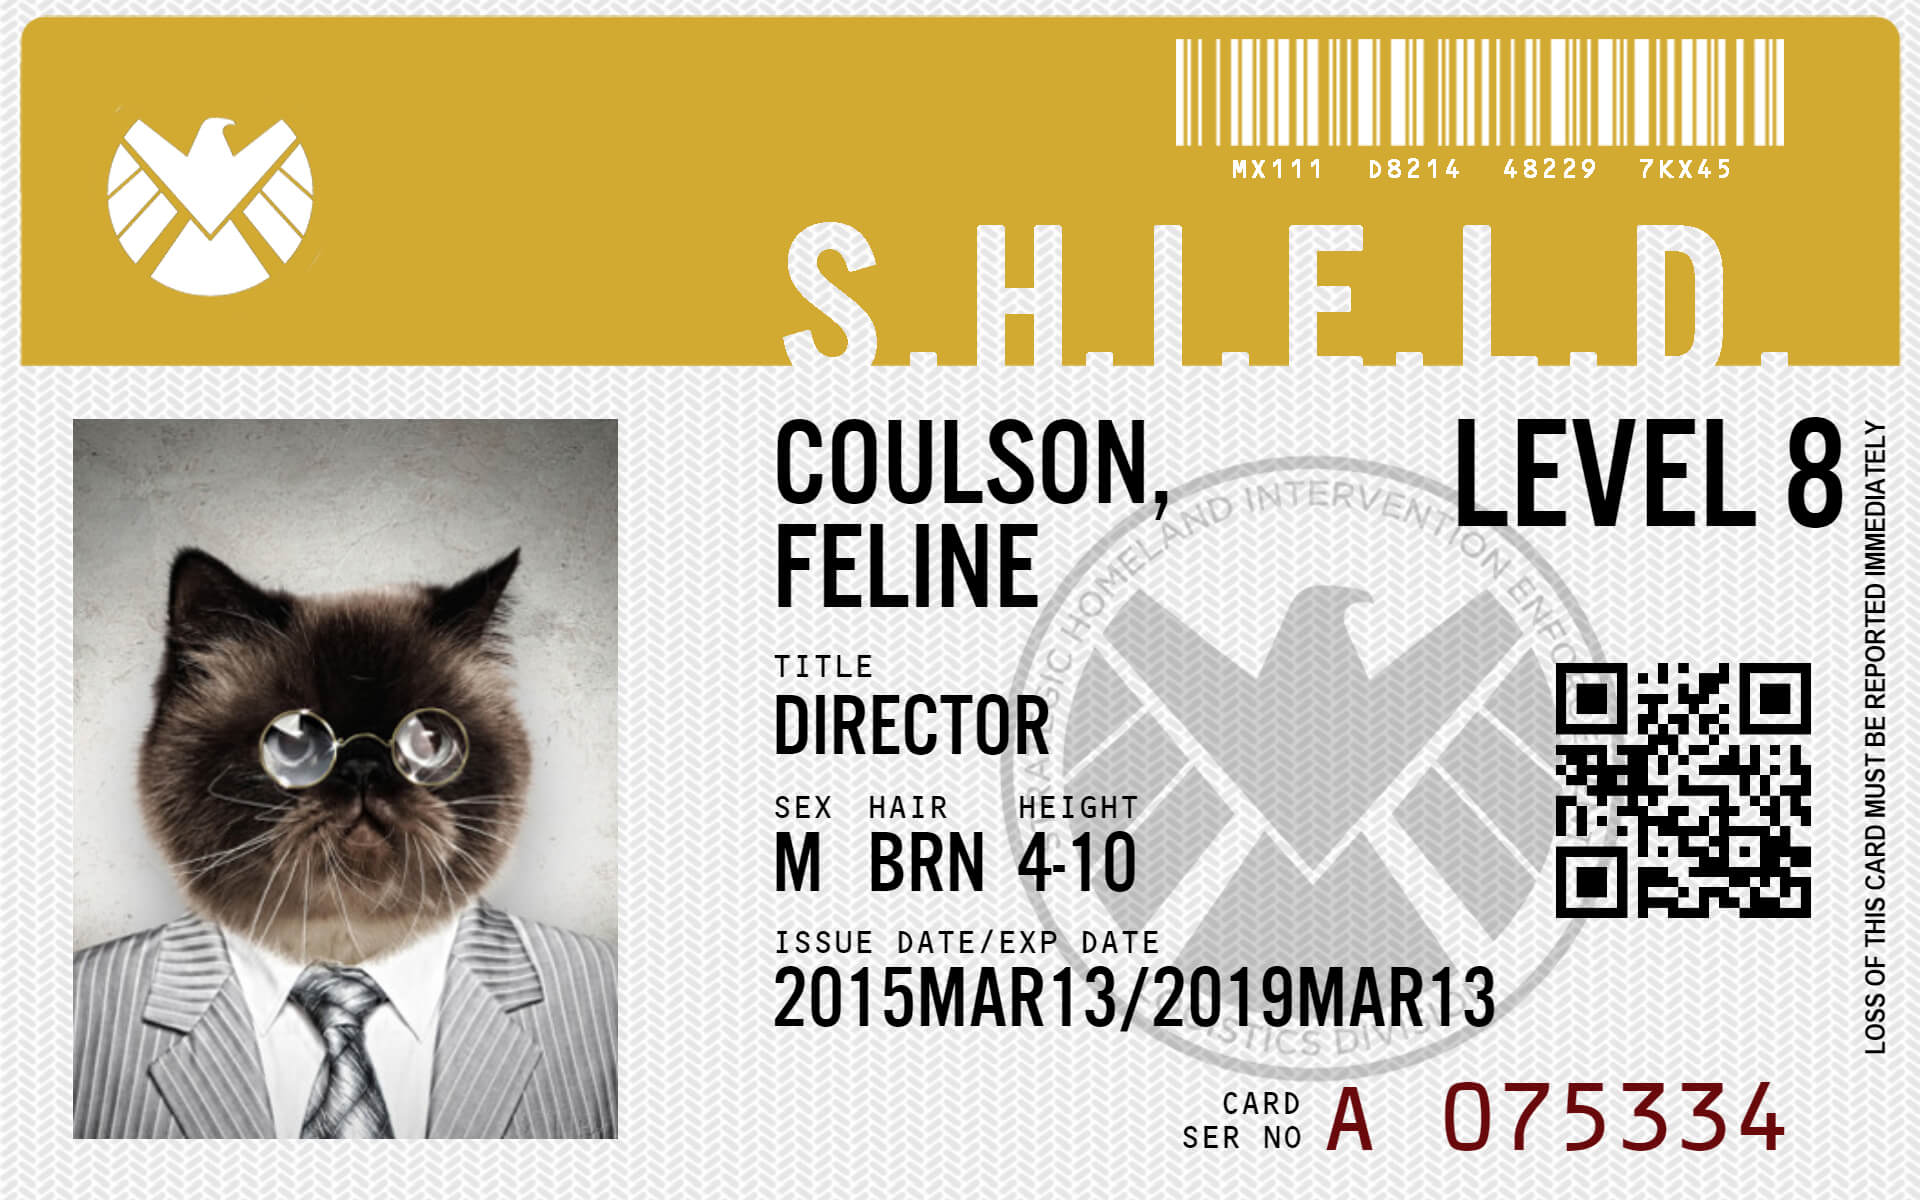 Every Fan Needs A Personalized Agents Of Shield Id Card With Shield Id Card Template